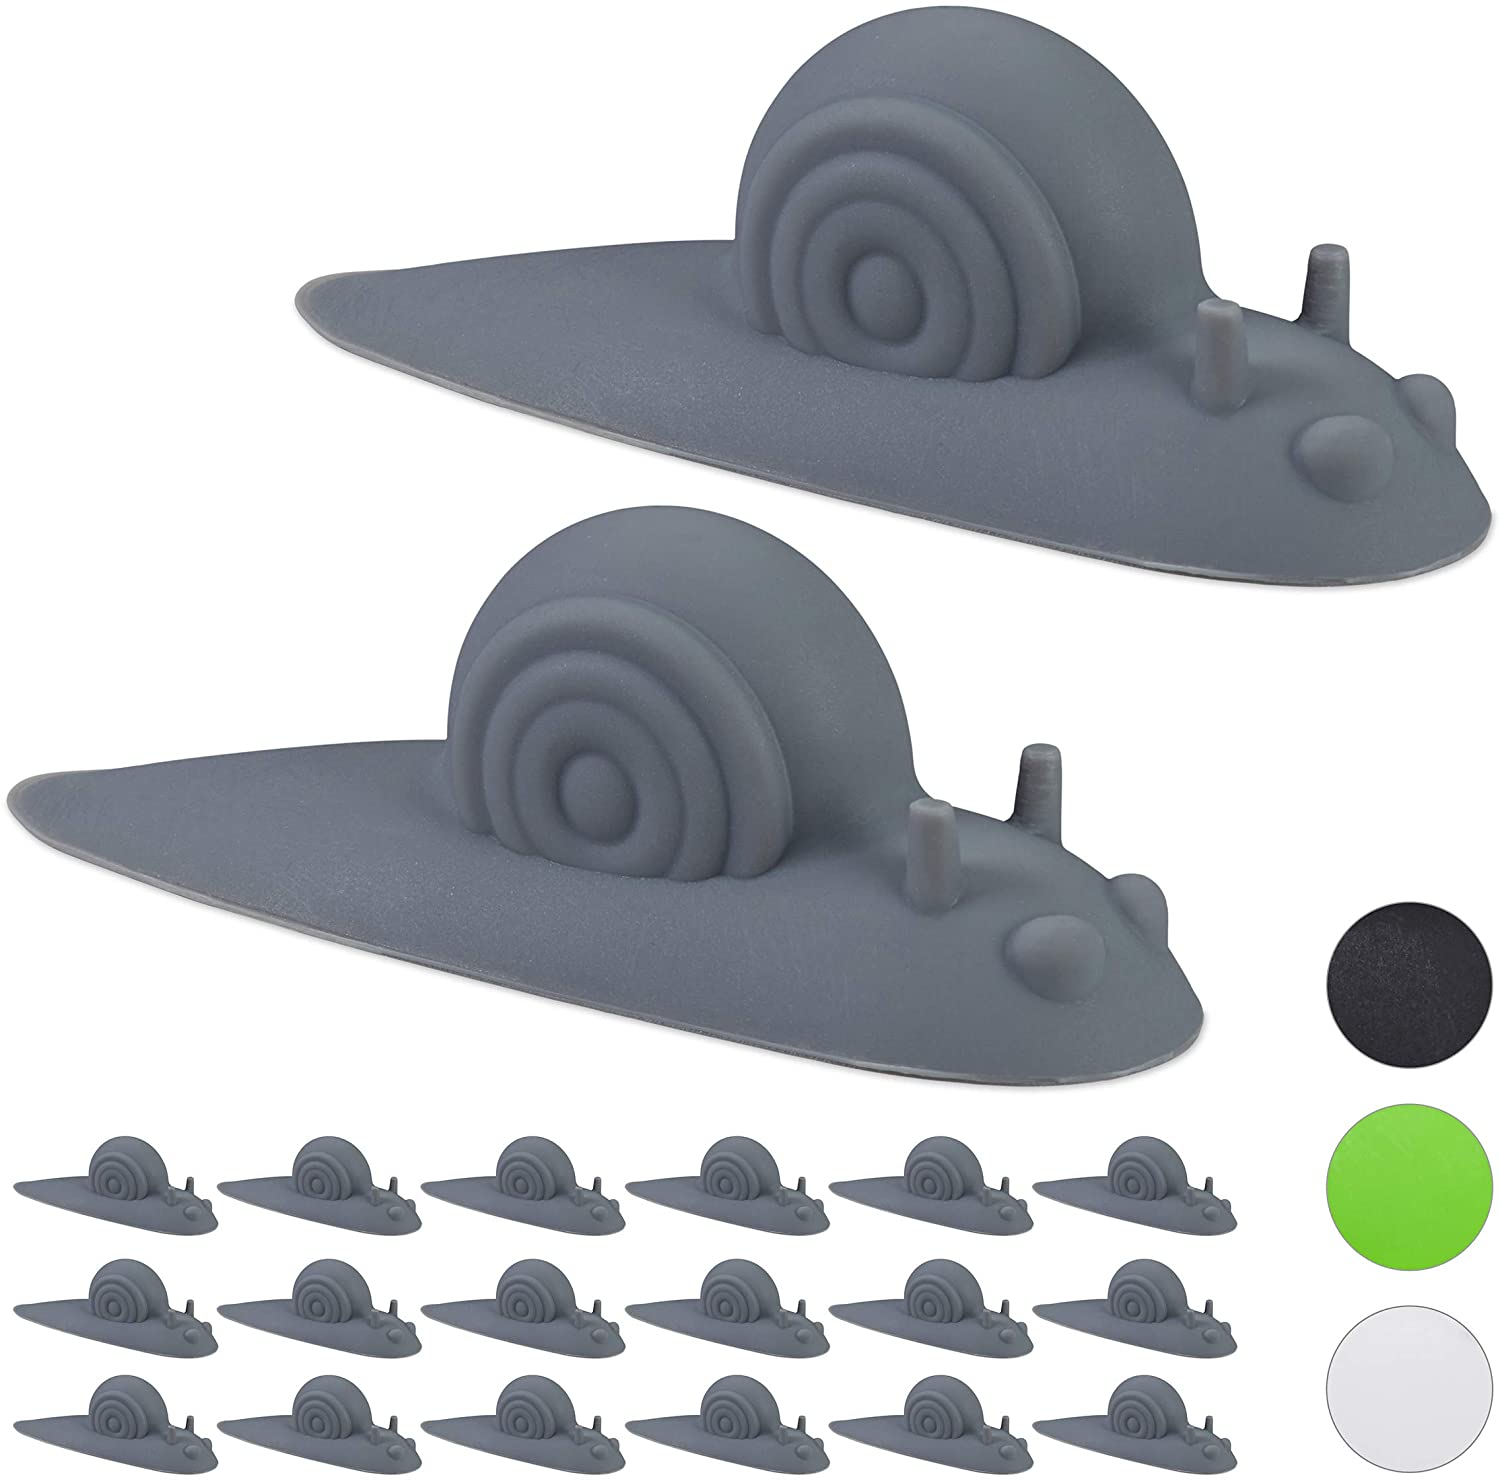 Relaxdays 20 X Door Stoppers Snail Door Wedge Rubber Soft Funny Protects Fl